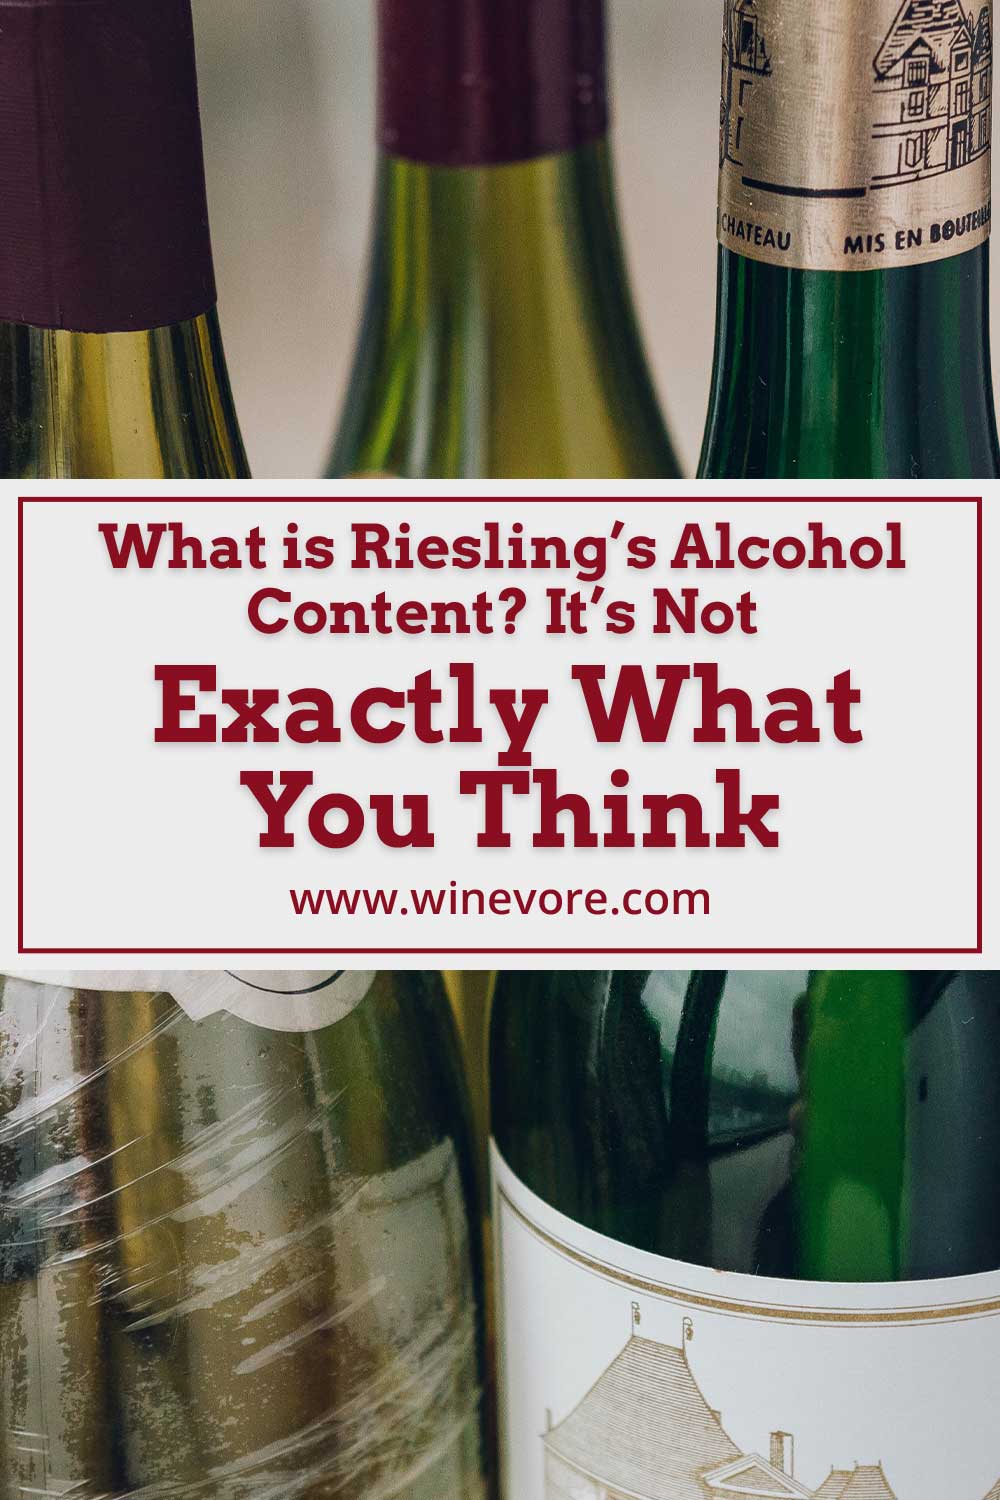 Three wine bottles together - Riesling's Alcohol Content